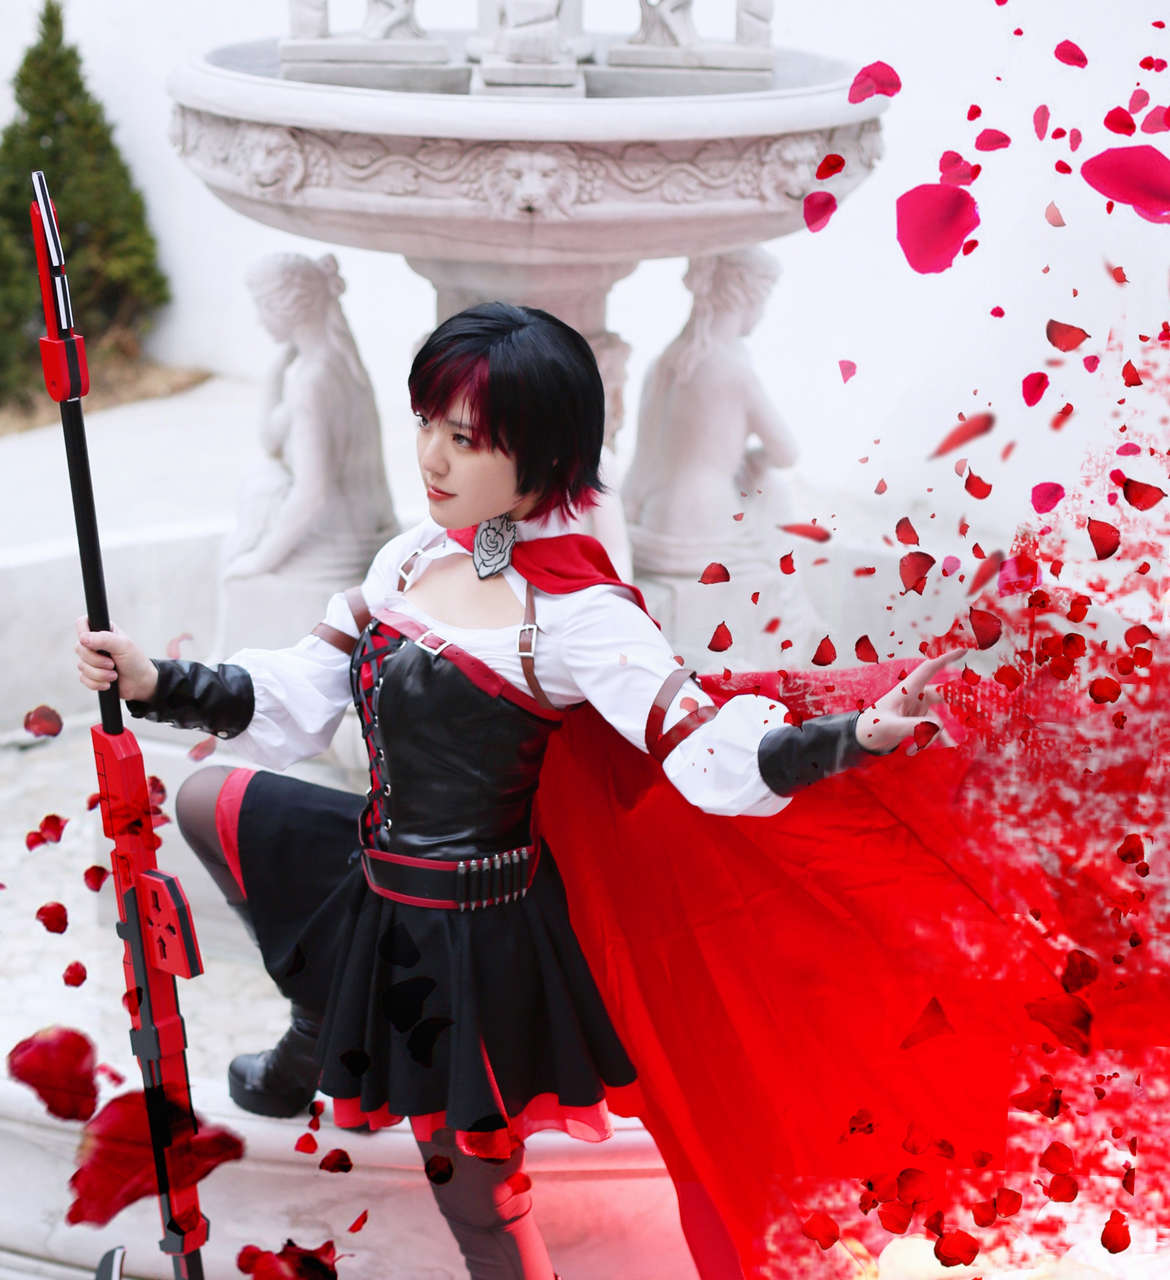 My Ruby Rose Cosplay